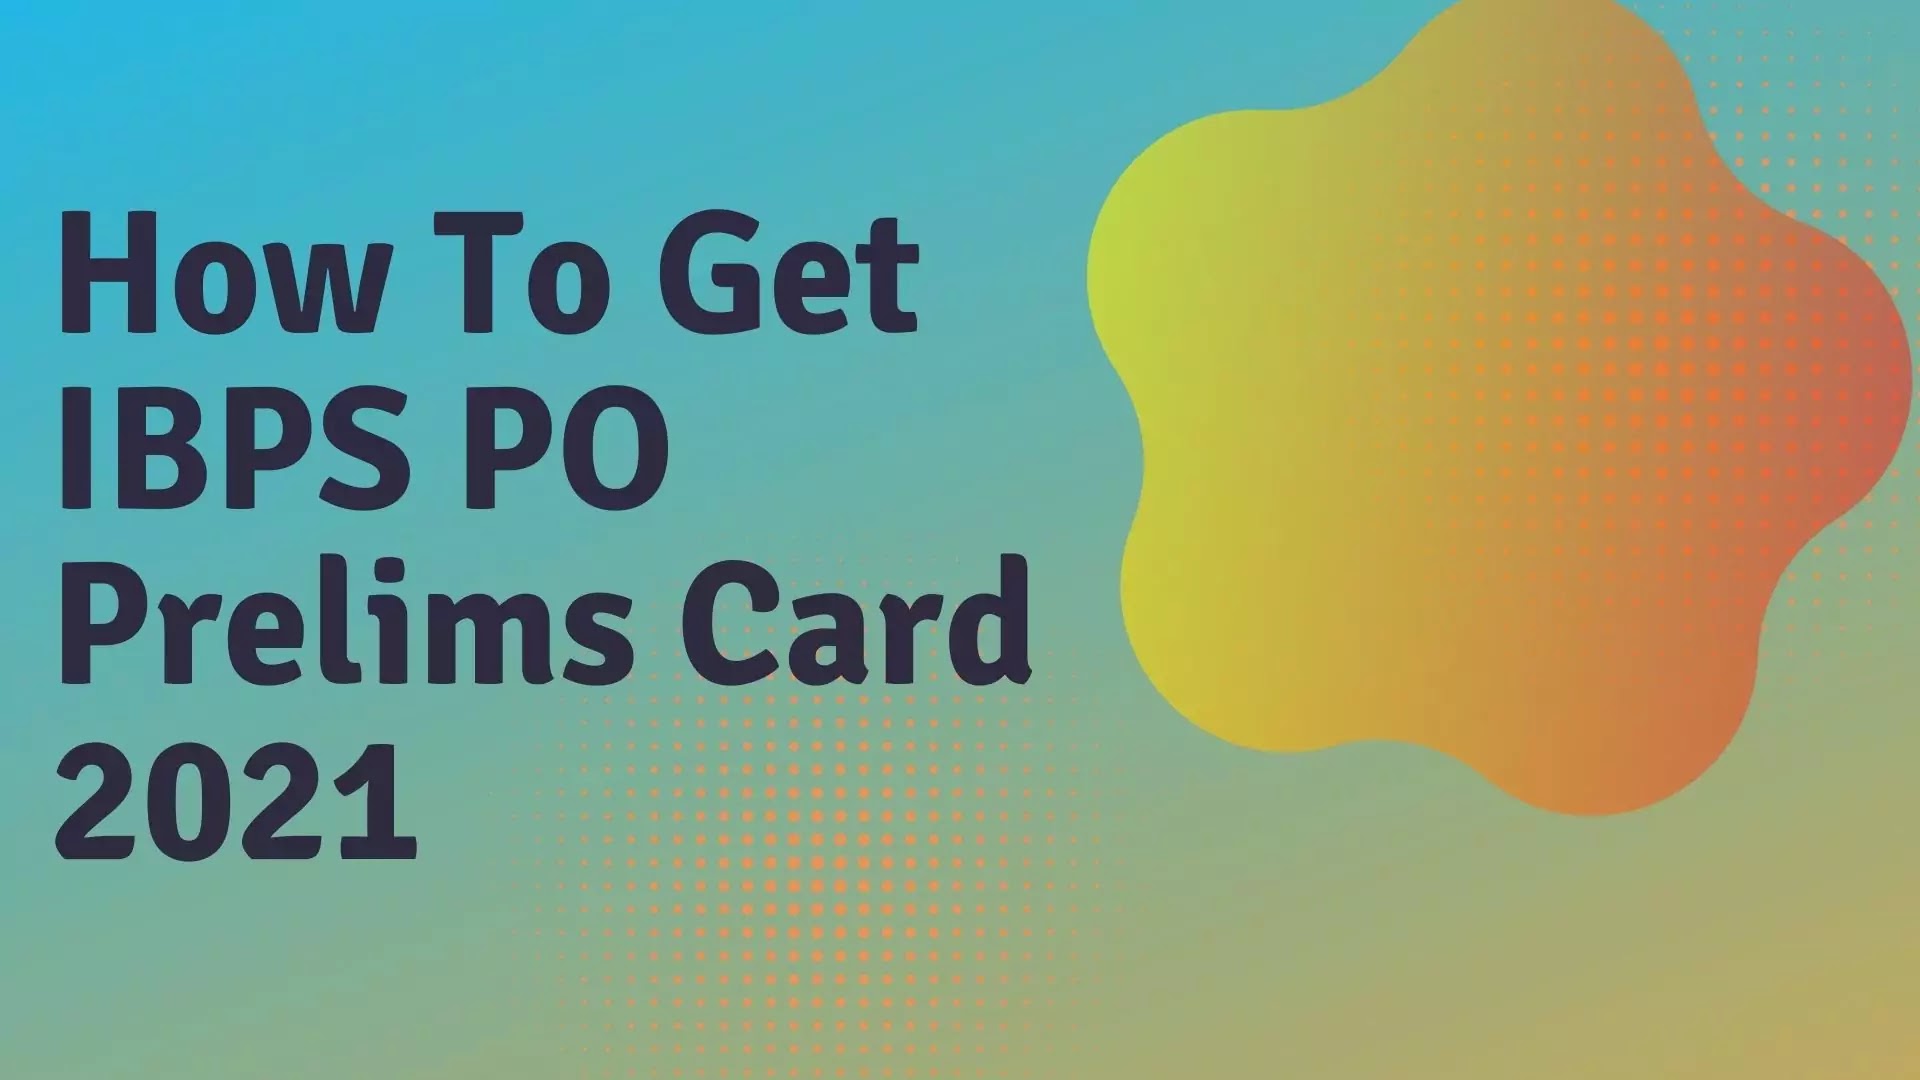 How To Get IBPS PO Prelims Card